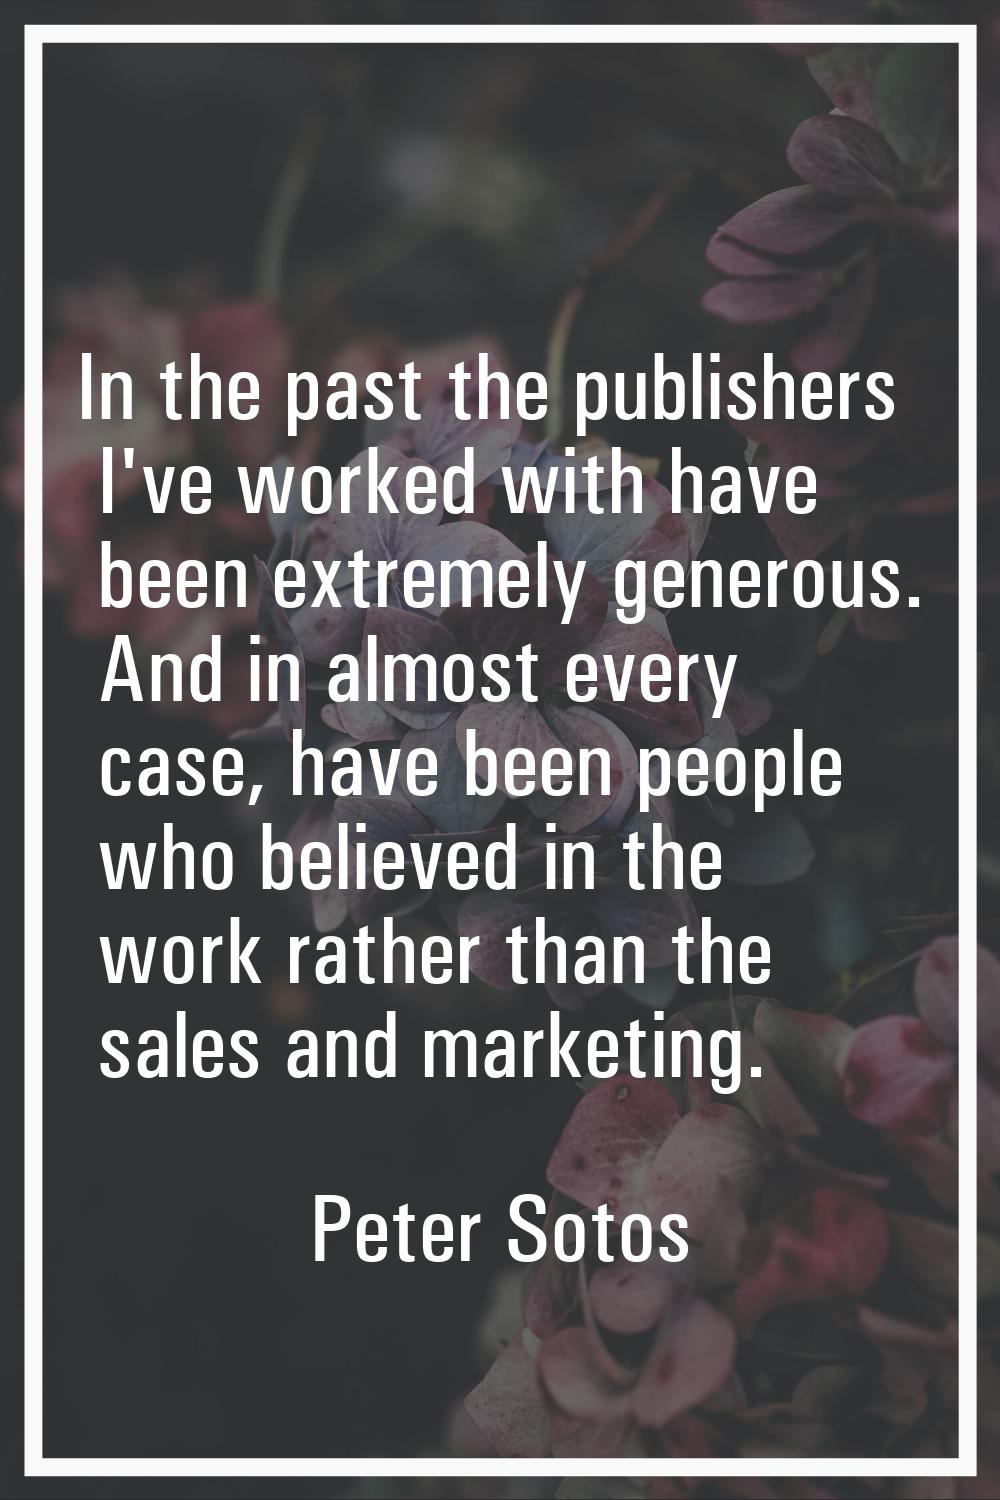 In the past the publishers I've worked with have been extremely generous. And in almost every case,